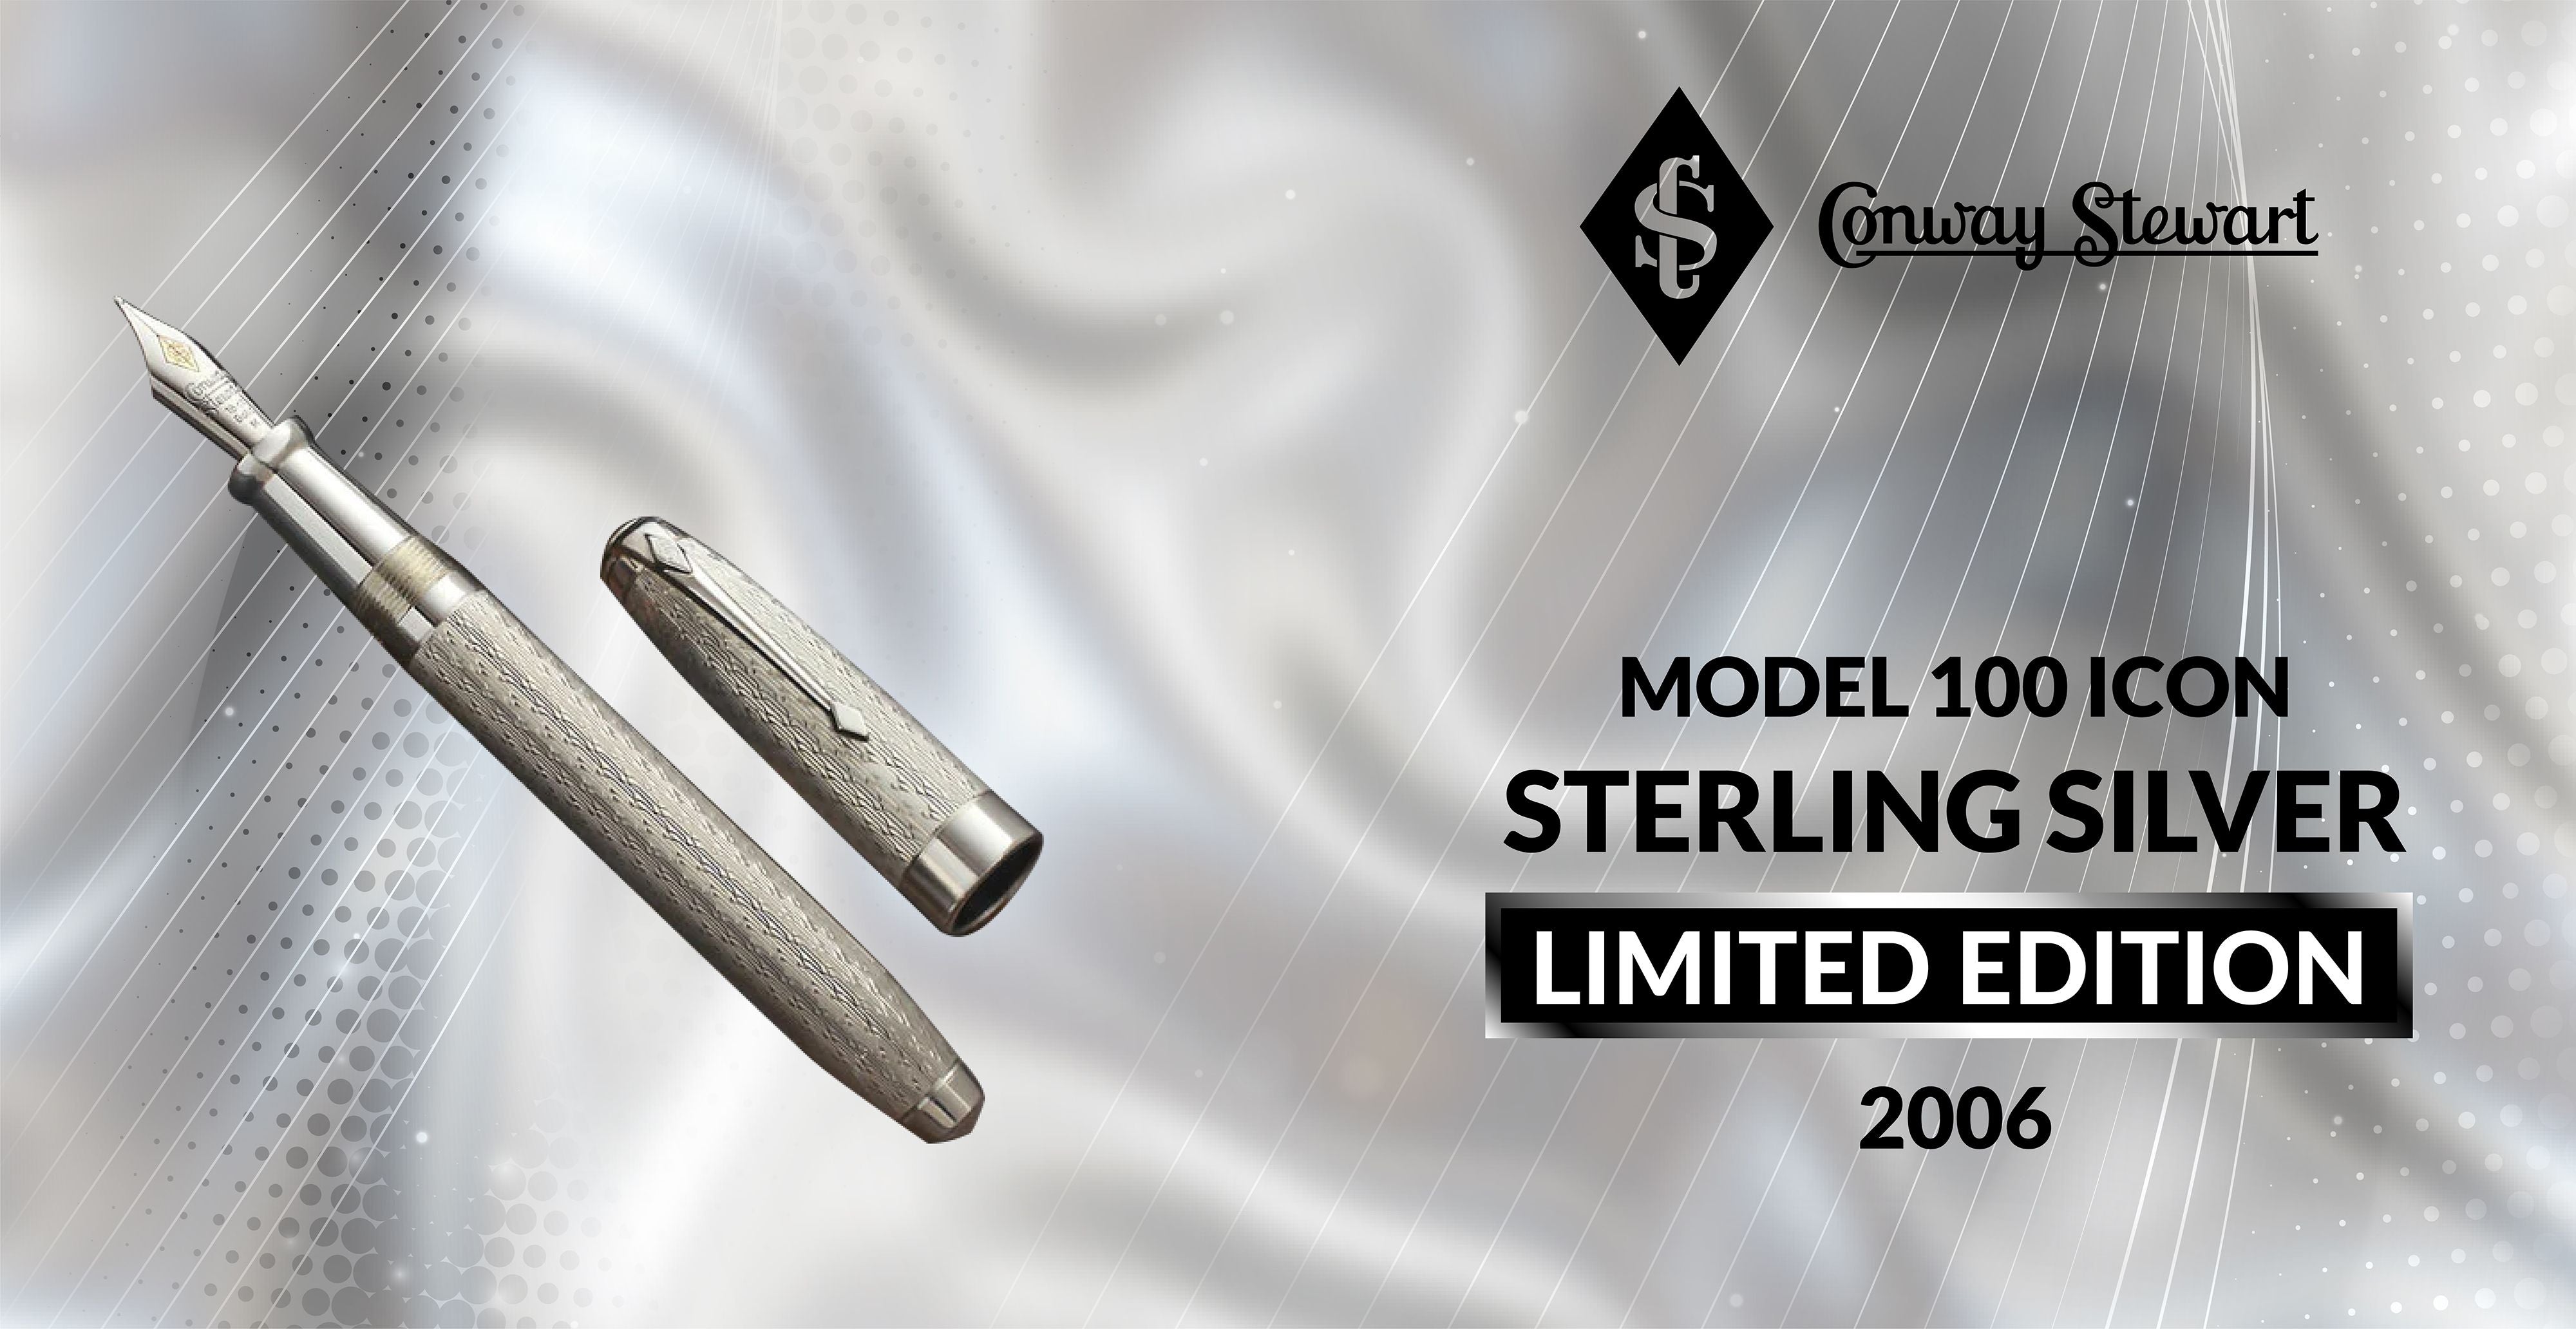 Model 100 Icon Sterling Silver, 2006